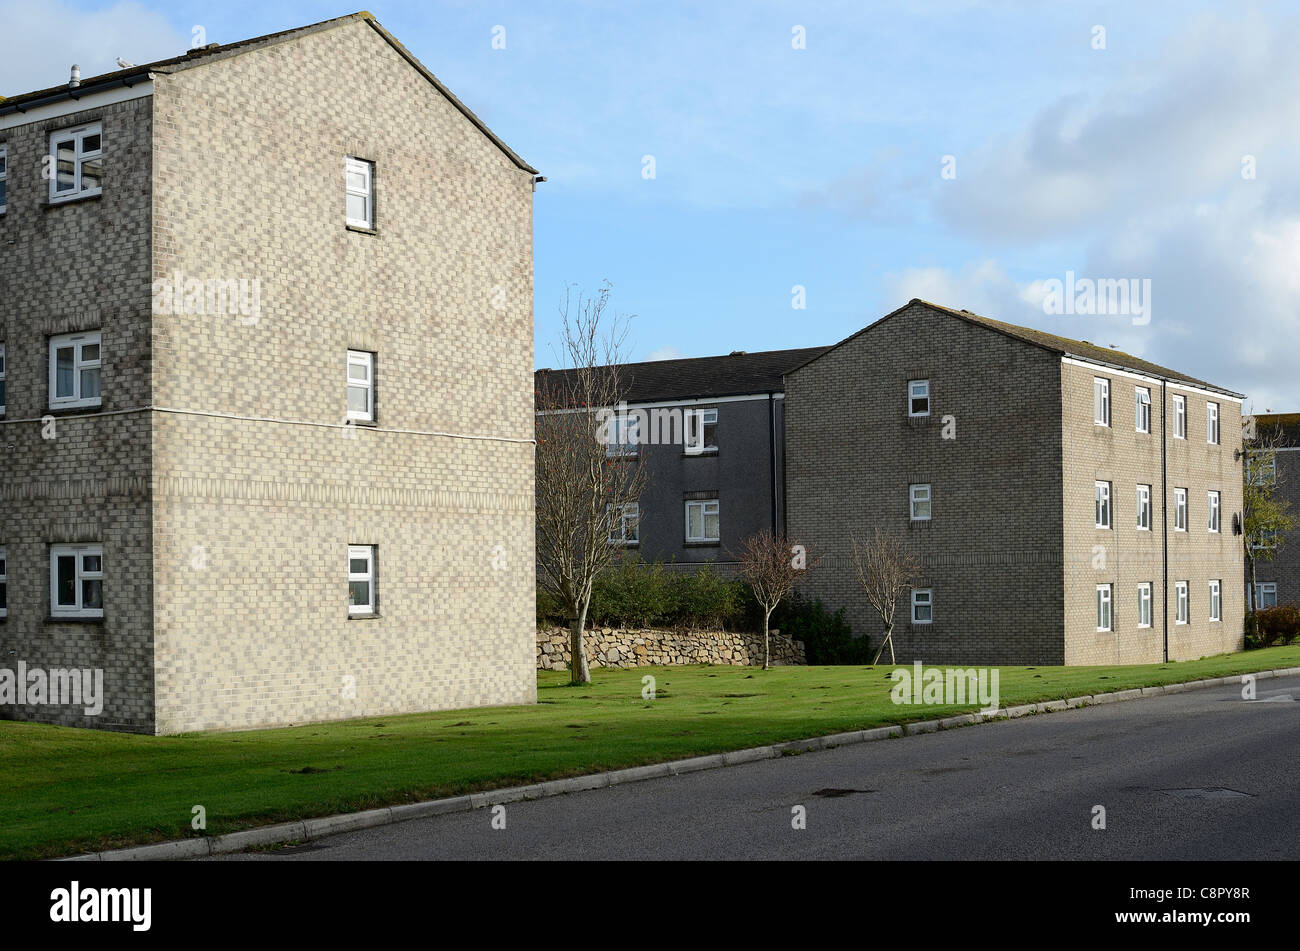 council flats in redruth, cornwall, uk Stock Photo